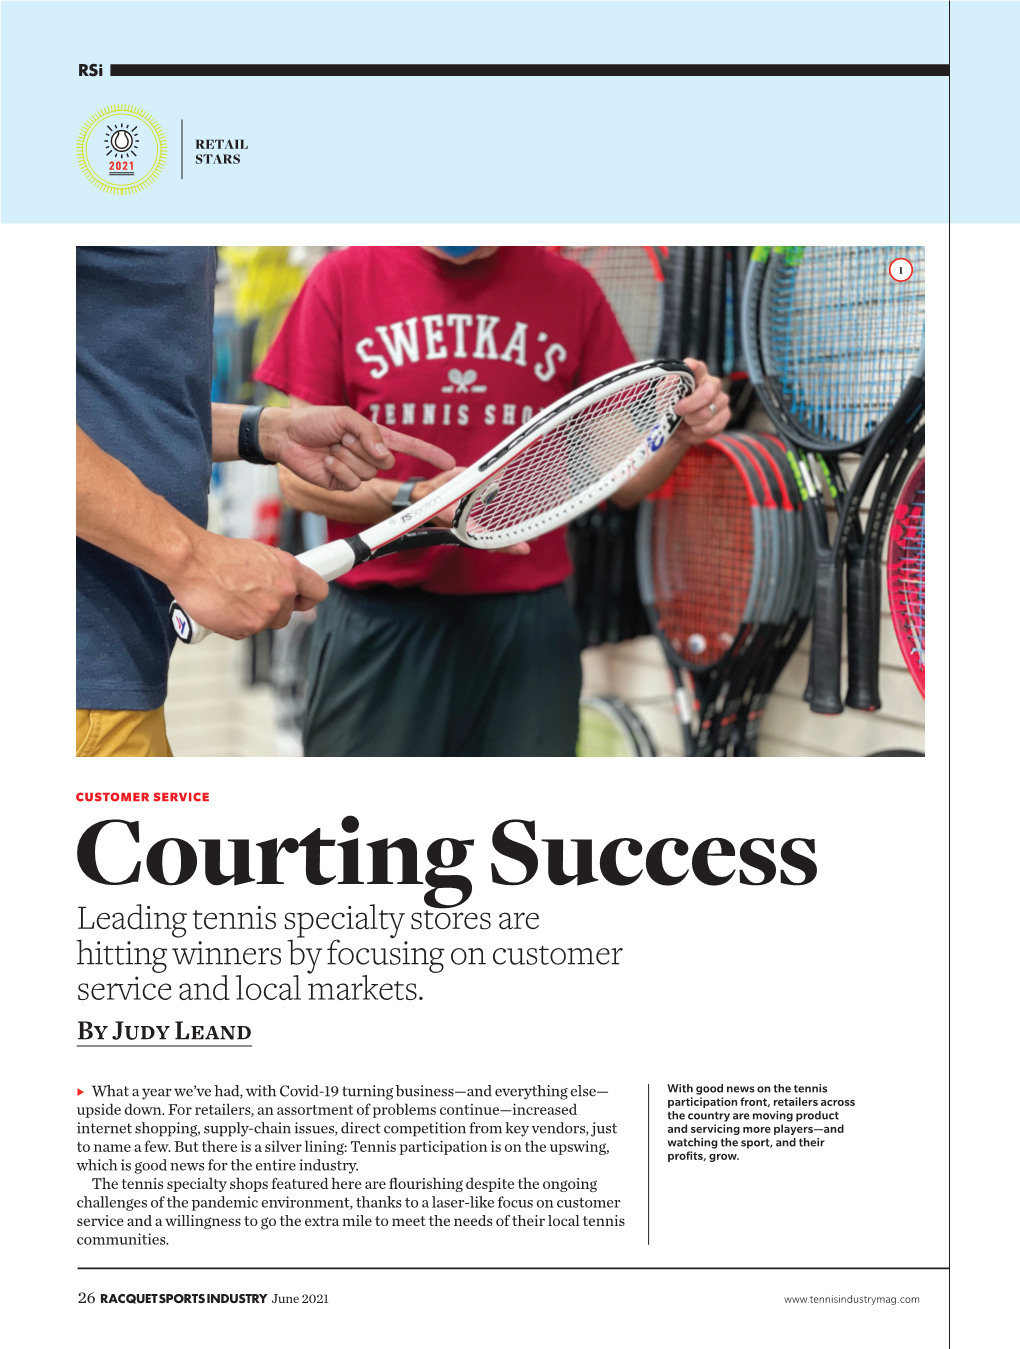 Courting Success Leading Tennis Specialty Stores Are Hitting Winners by Focusing on Customer Service and Local Markets